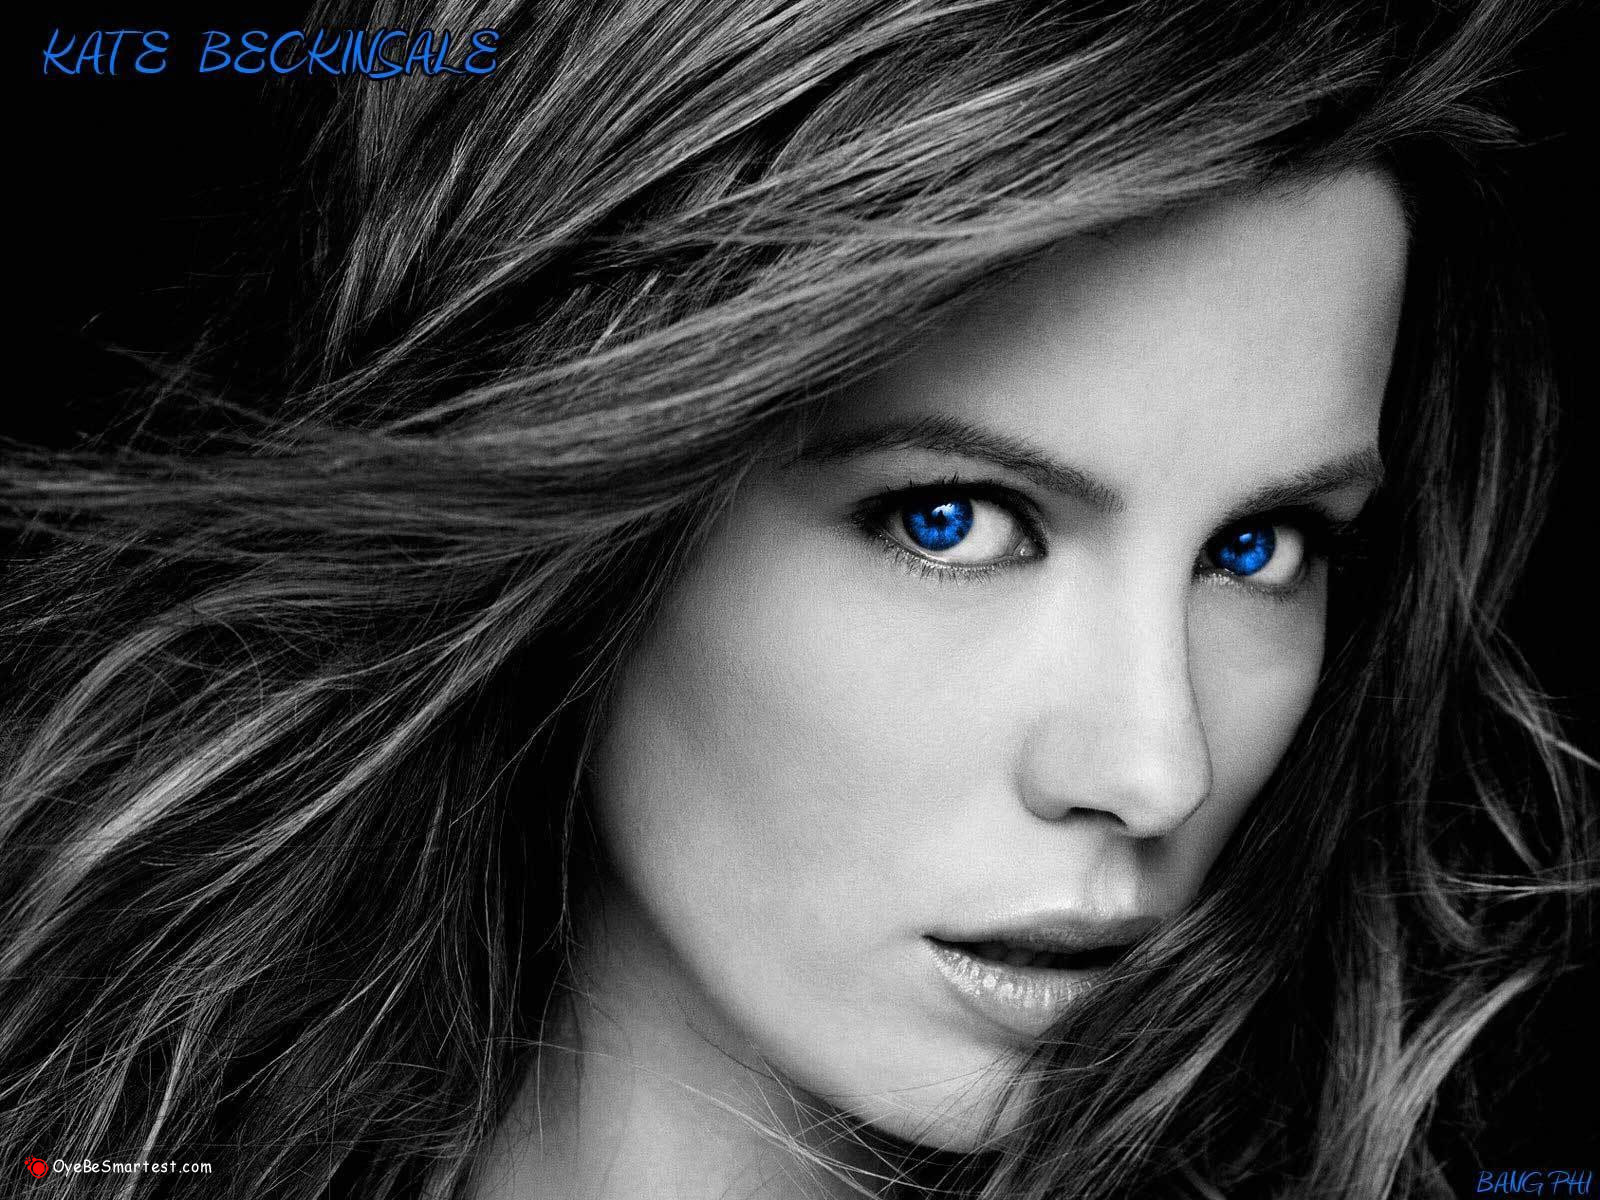 Kate Beckinsale Poster Images Wallpapers